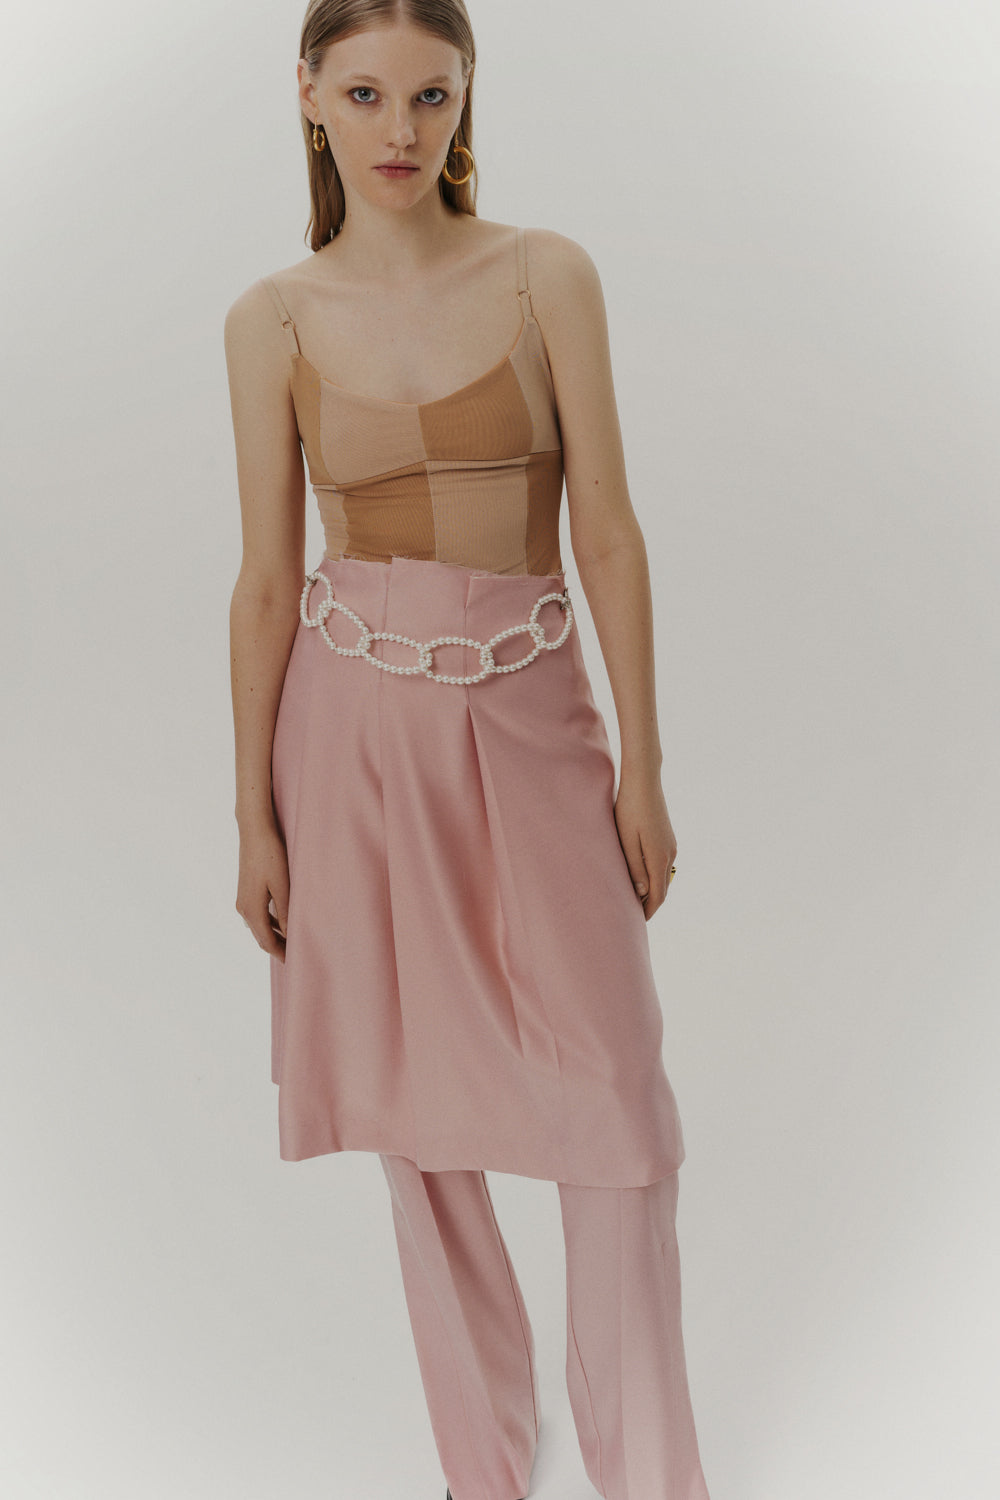 'Art-Director' Skirt with Pearl Detail ARCHIVE